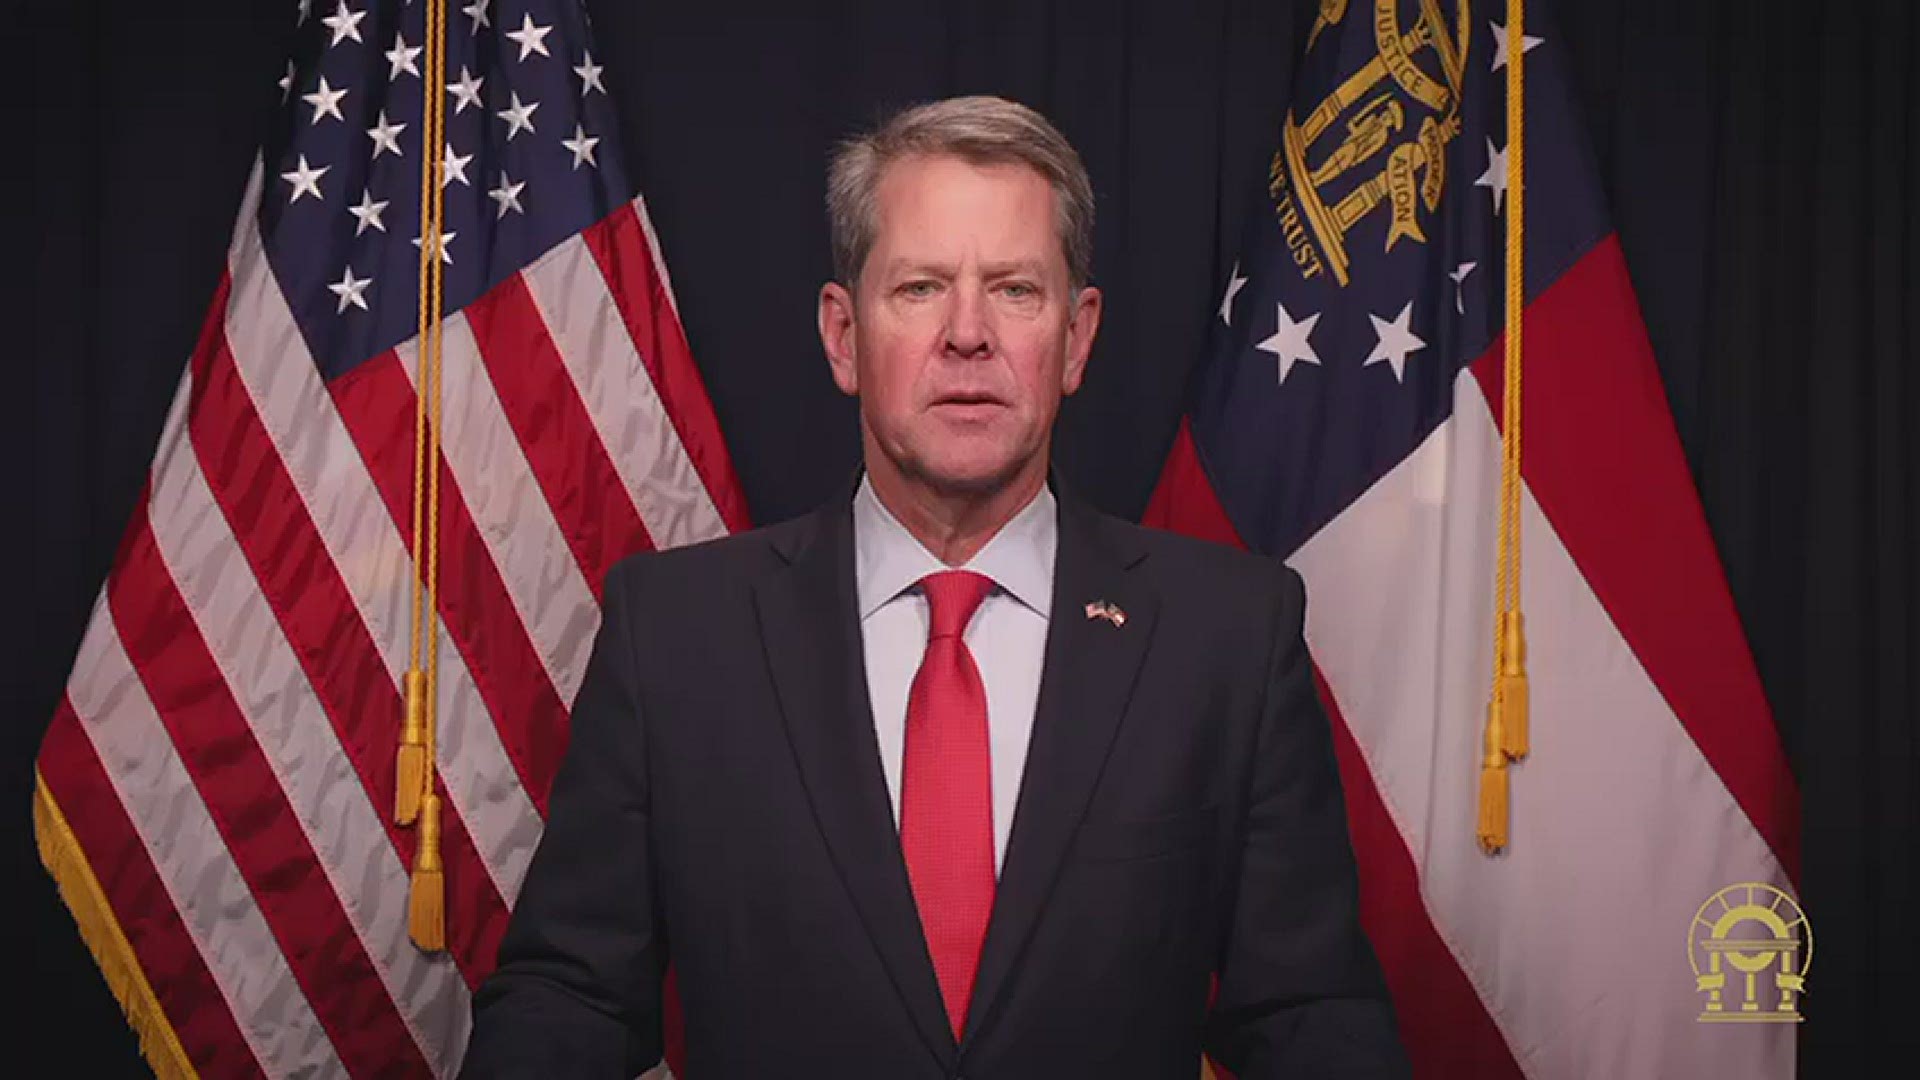 Governor Brian Kemp is urging Georgians to "hunker down and stay vigilant."